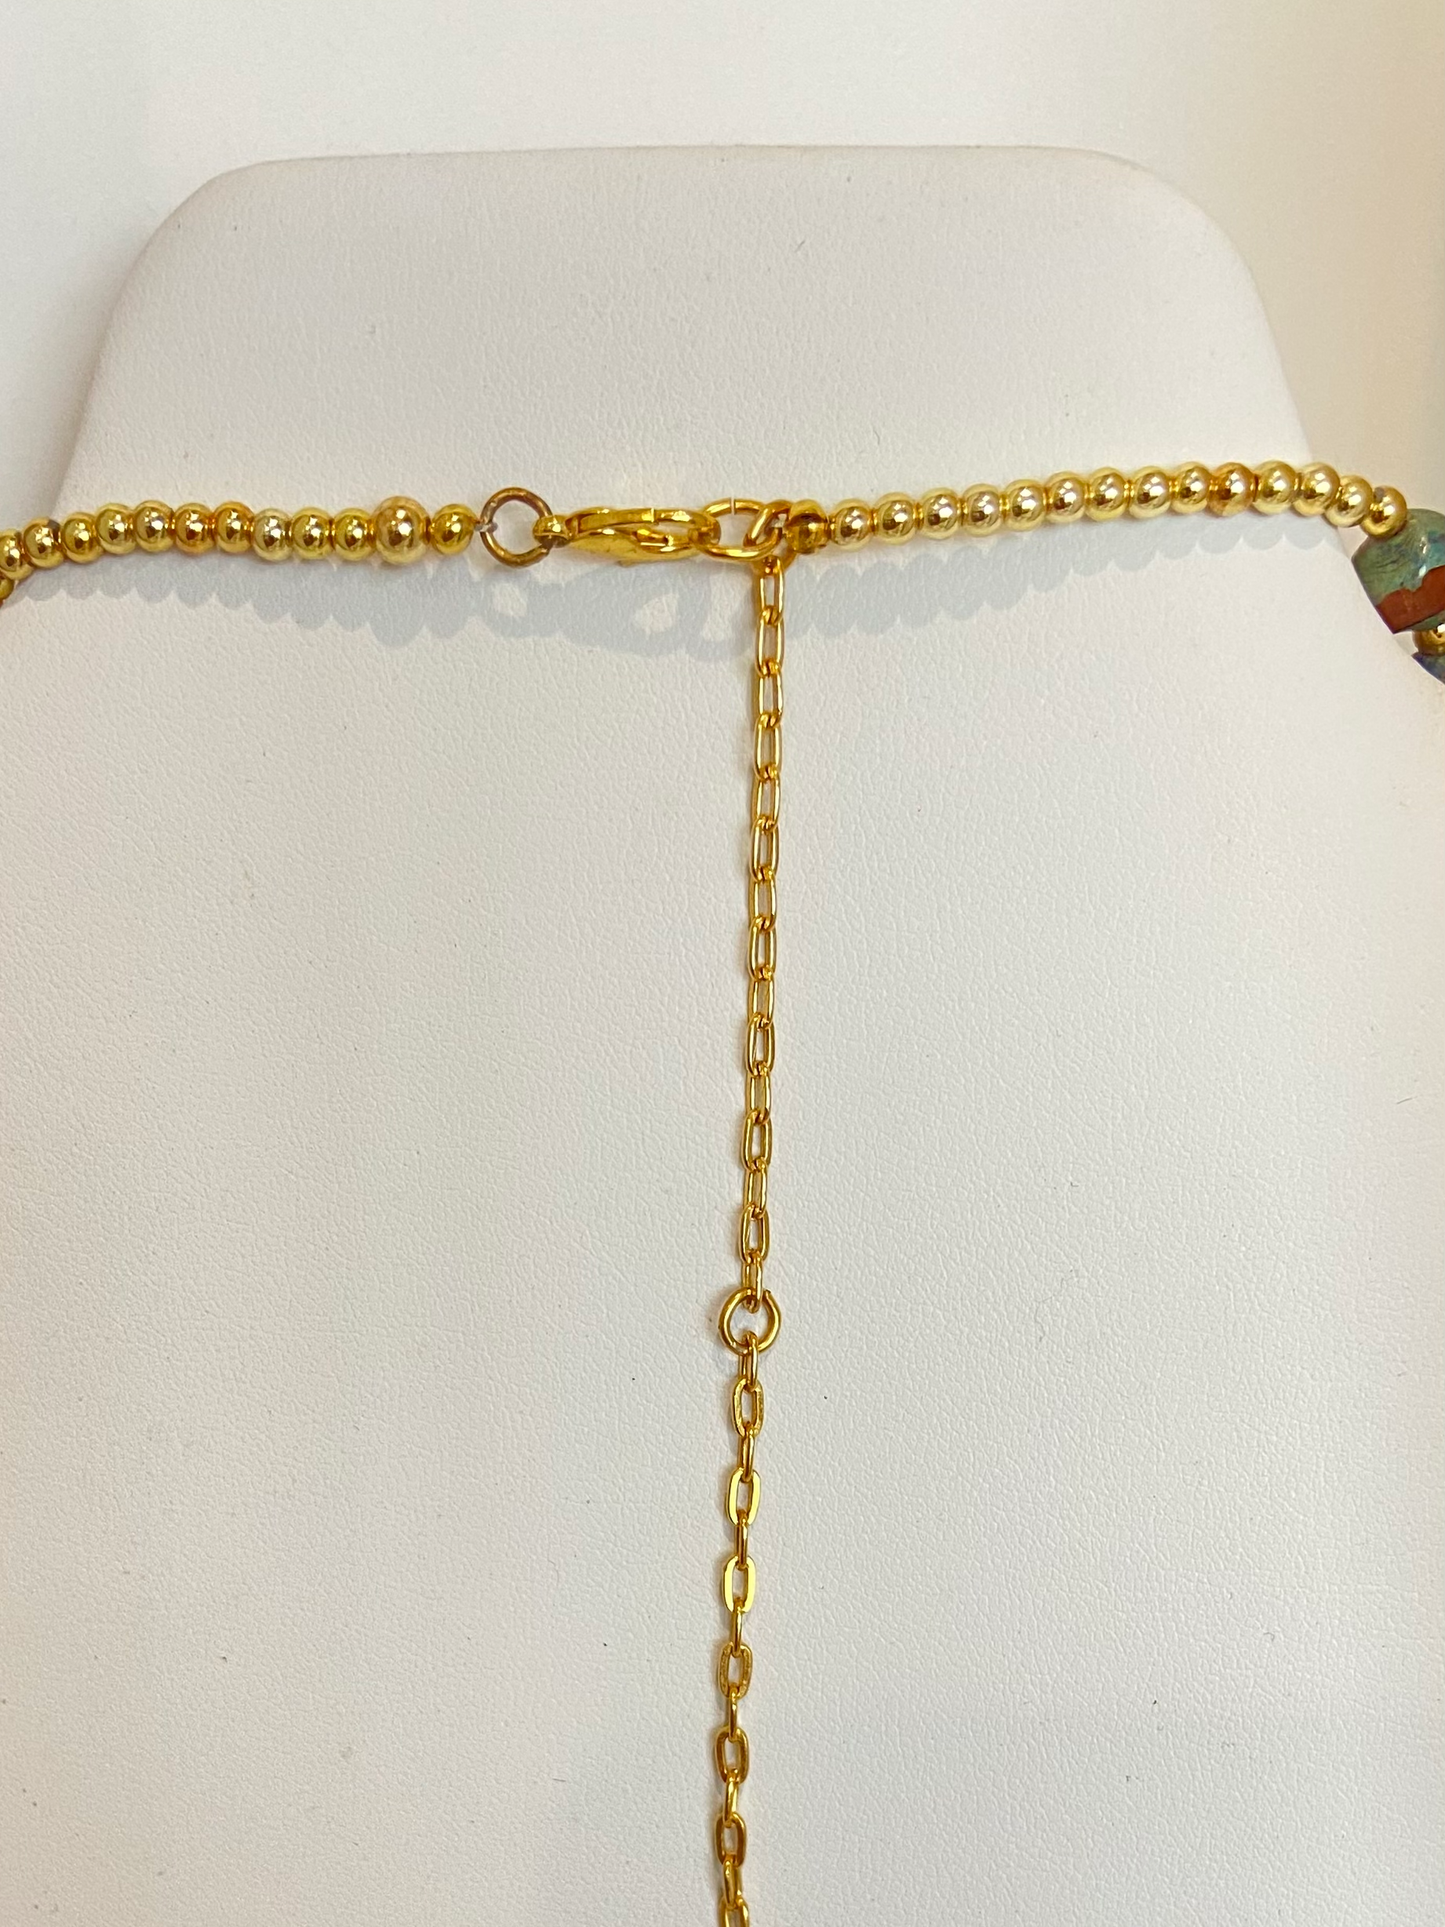 Heart rainbow pendant on a gold filled chain